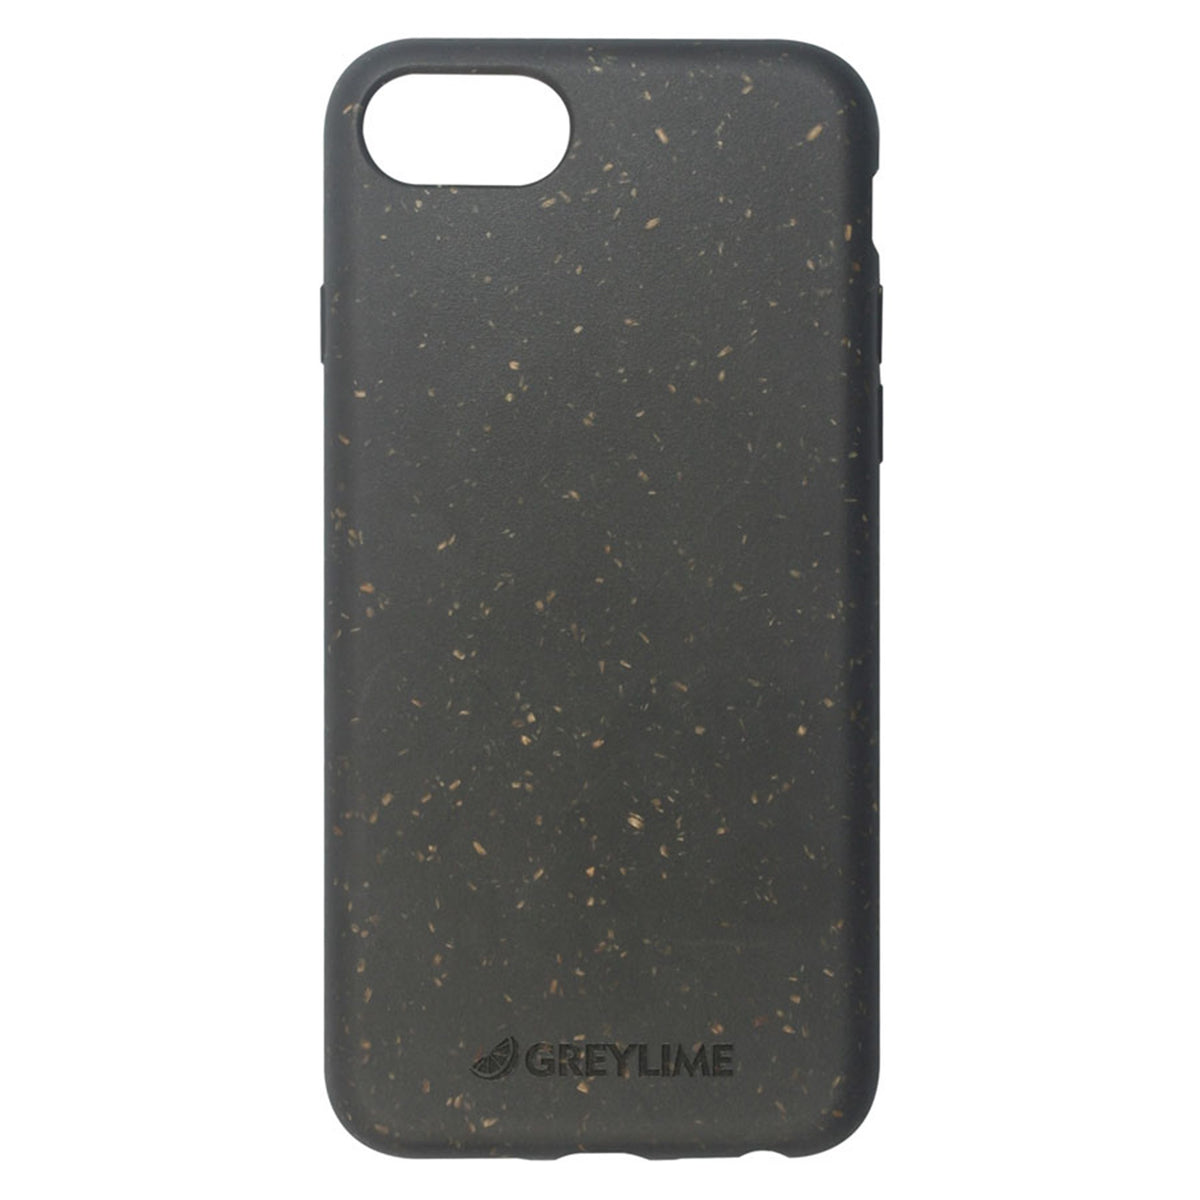 COIP67810 Greylime Iphone 678SE Biodegradable Cover Black 1